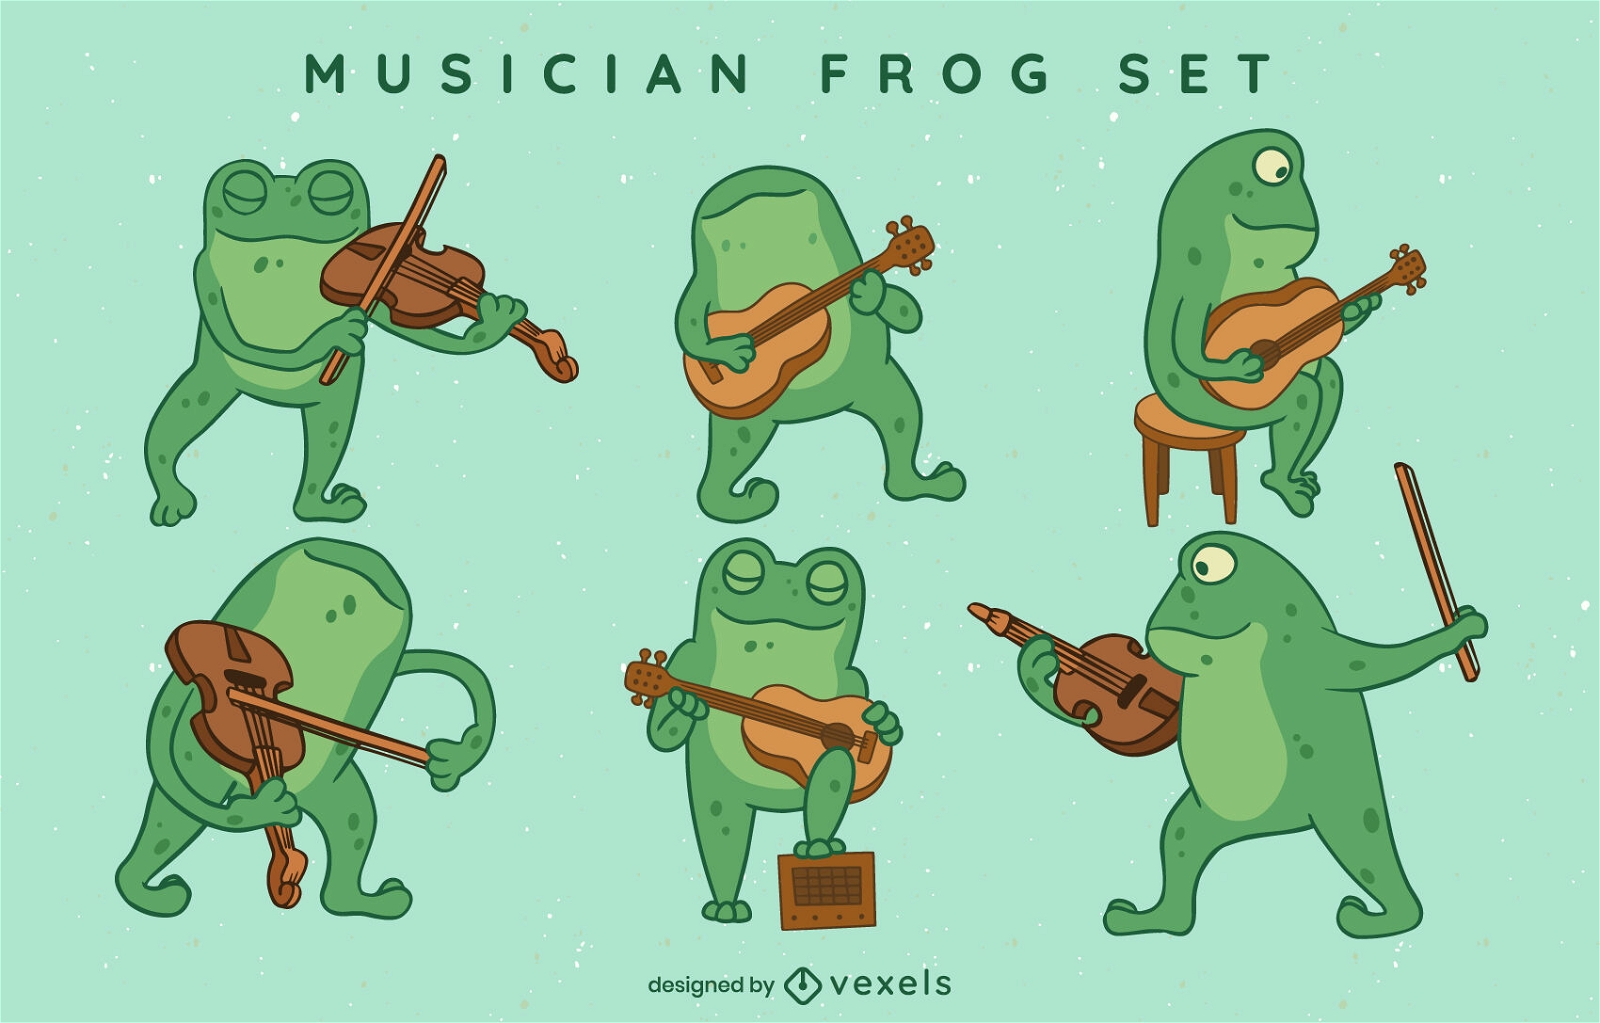 Violinist and guitarist frog character set